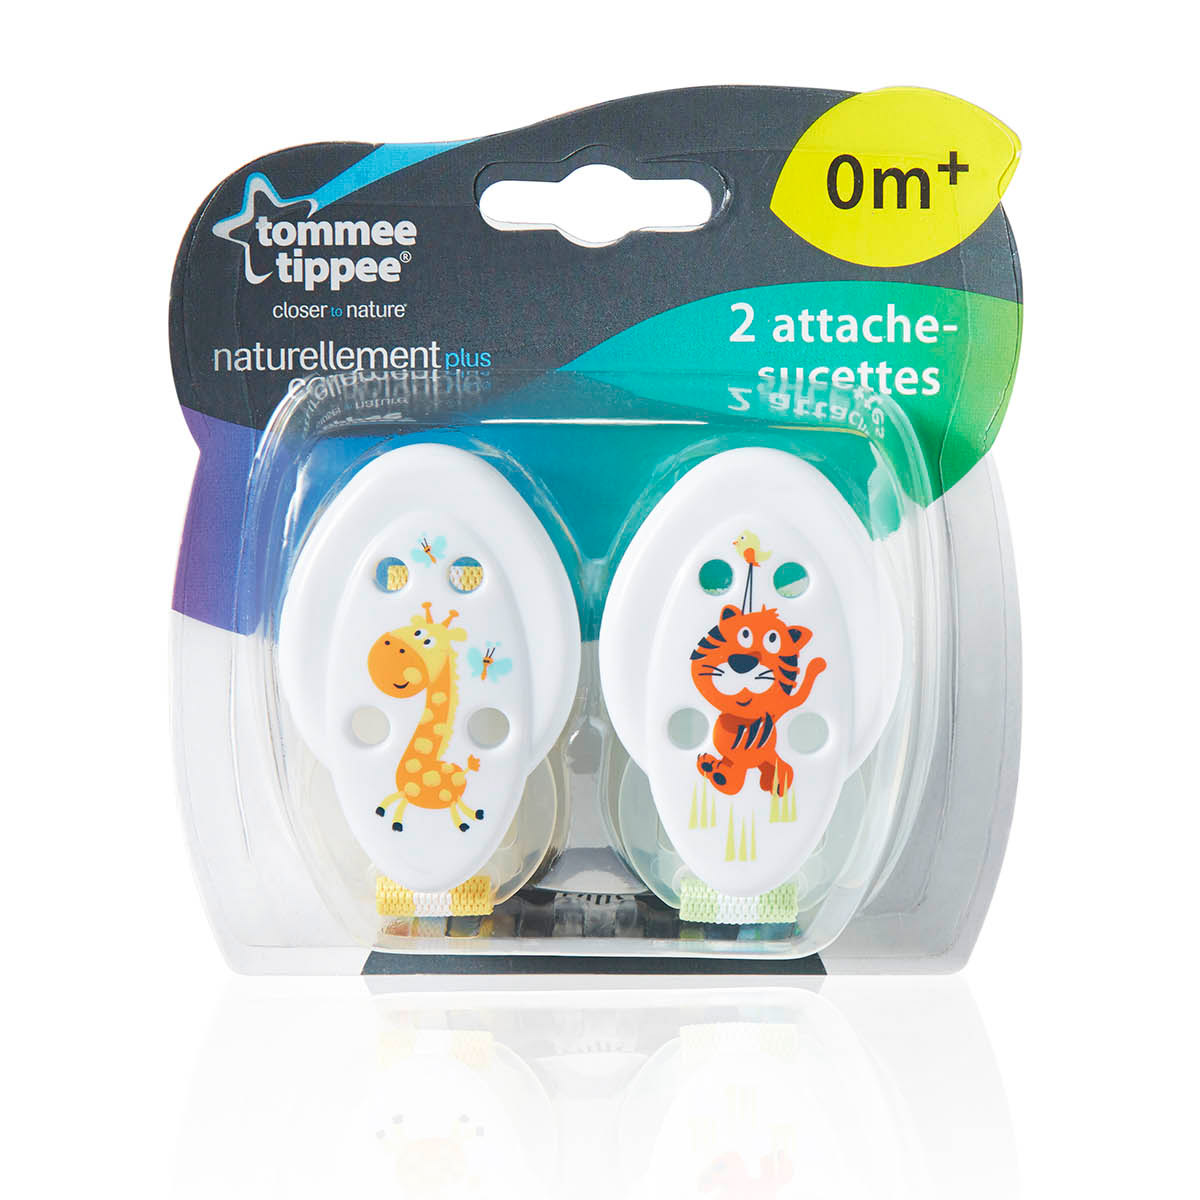 TOMMEE TIPPEE CLIP-ON ATTACHE SUCETTE 0M+ X2 - .:: CAMPUS PARA